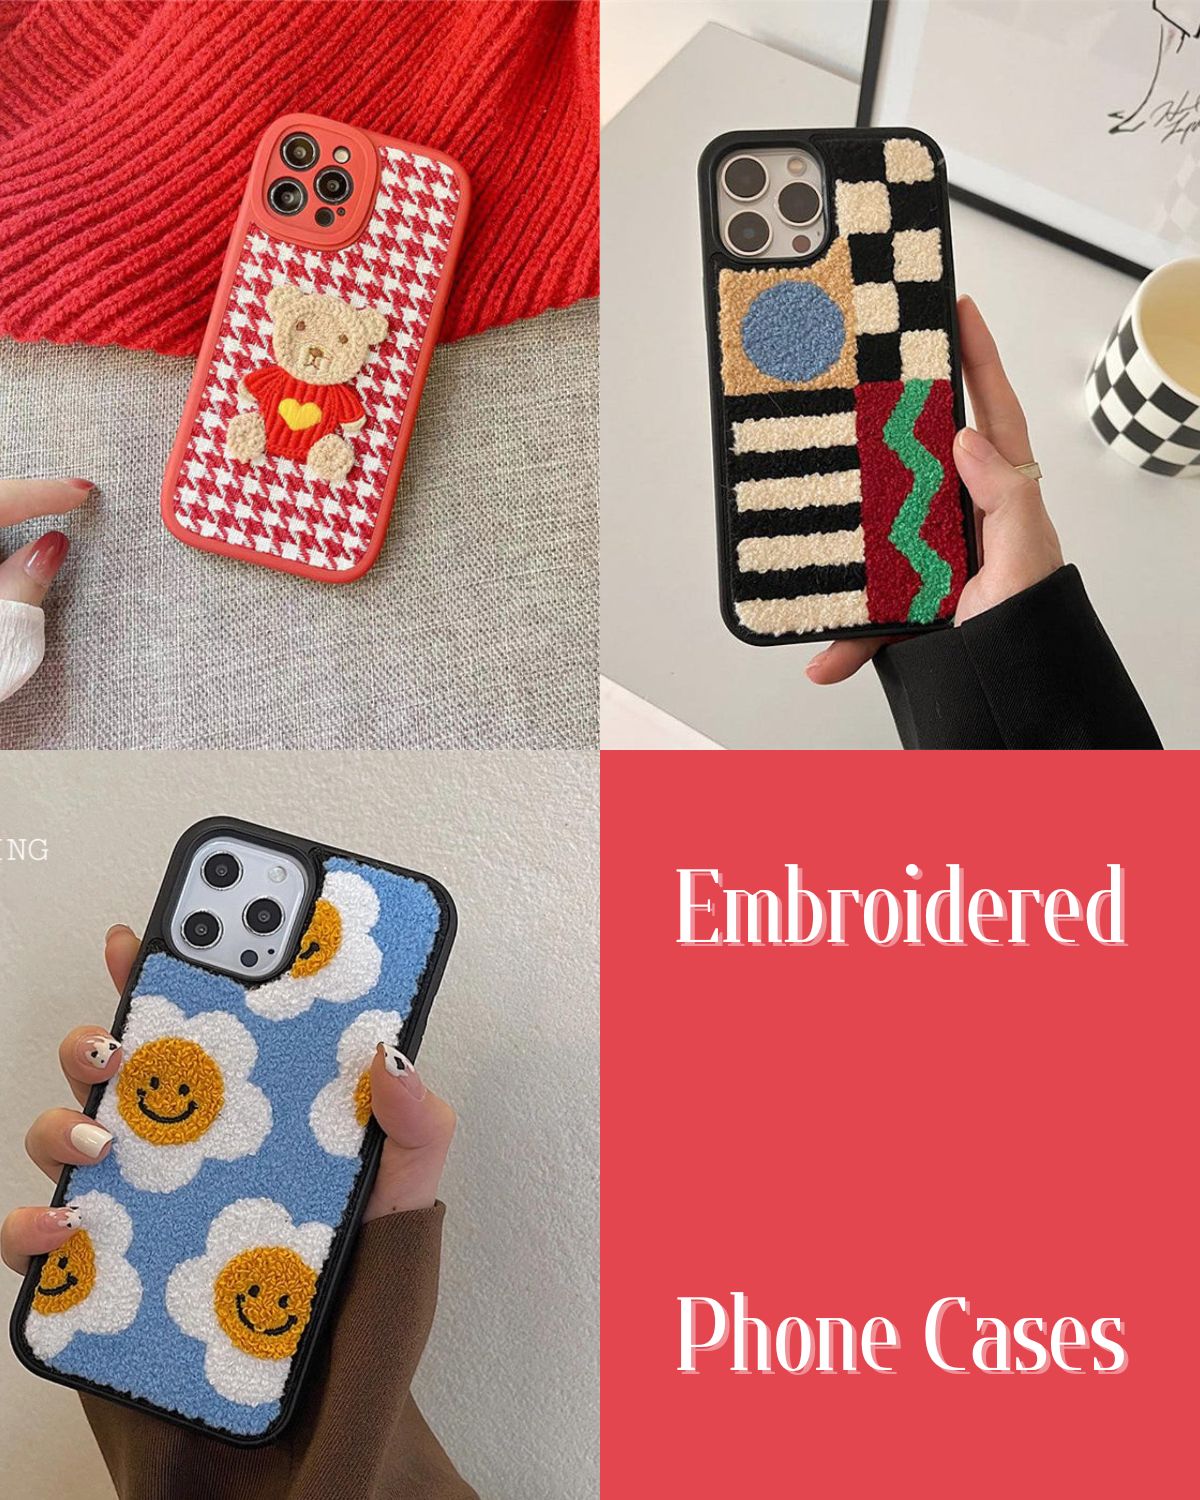 Embroidered phone cases